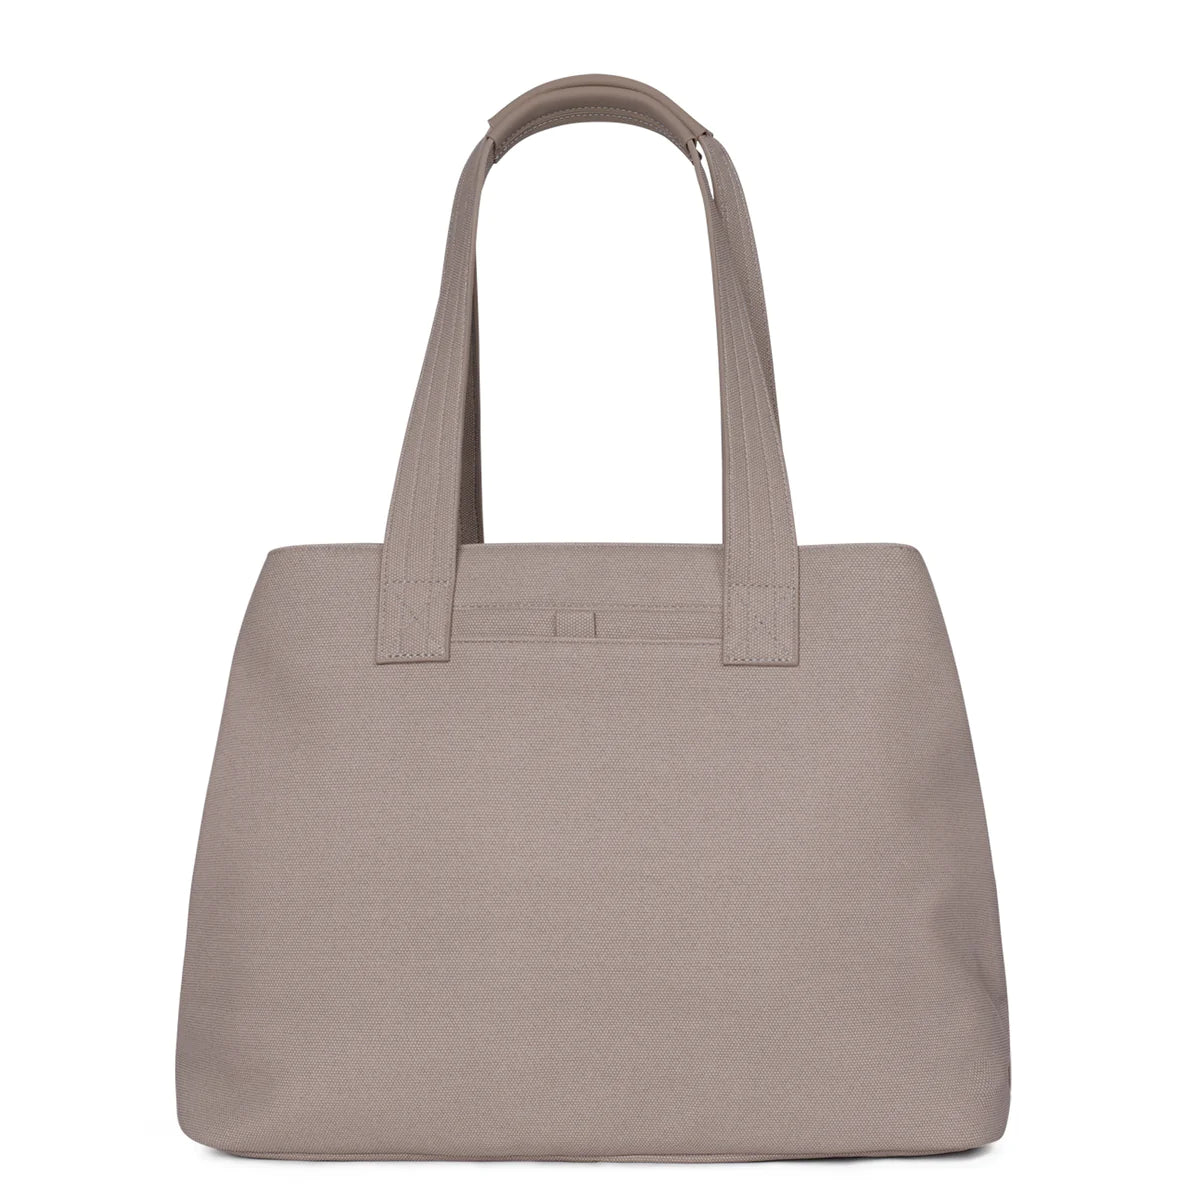 Lug Tempo Matte Lux VL Large Bag. New W Tags/Peta Approved